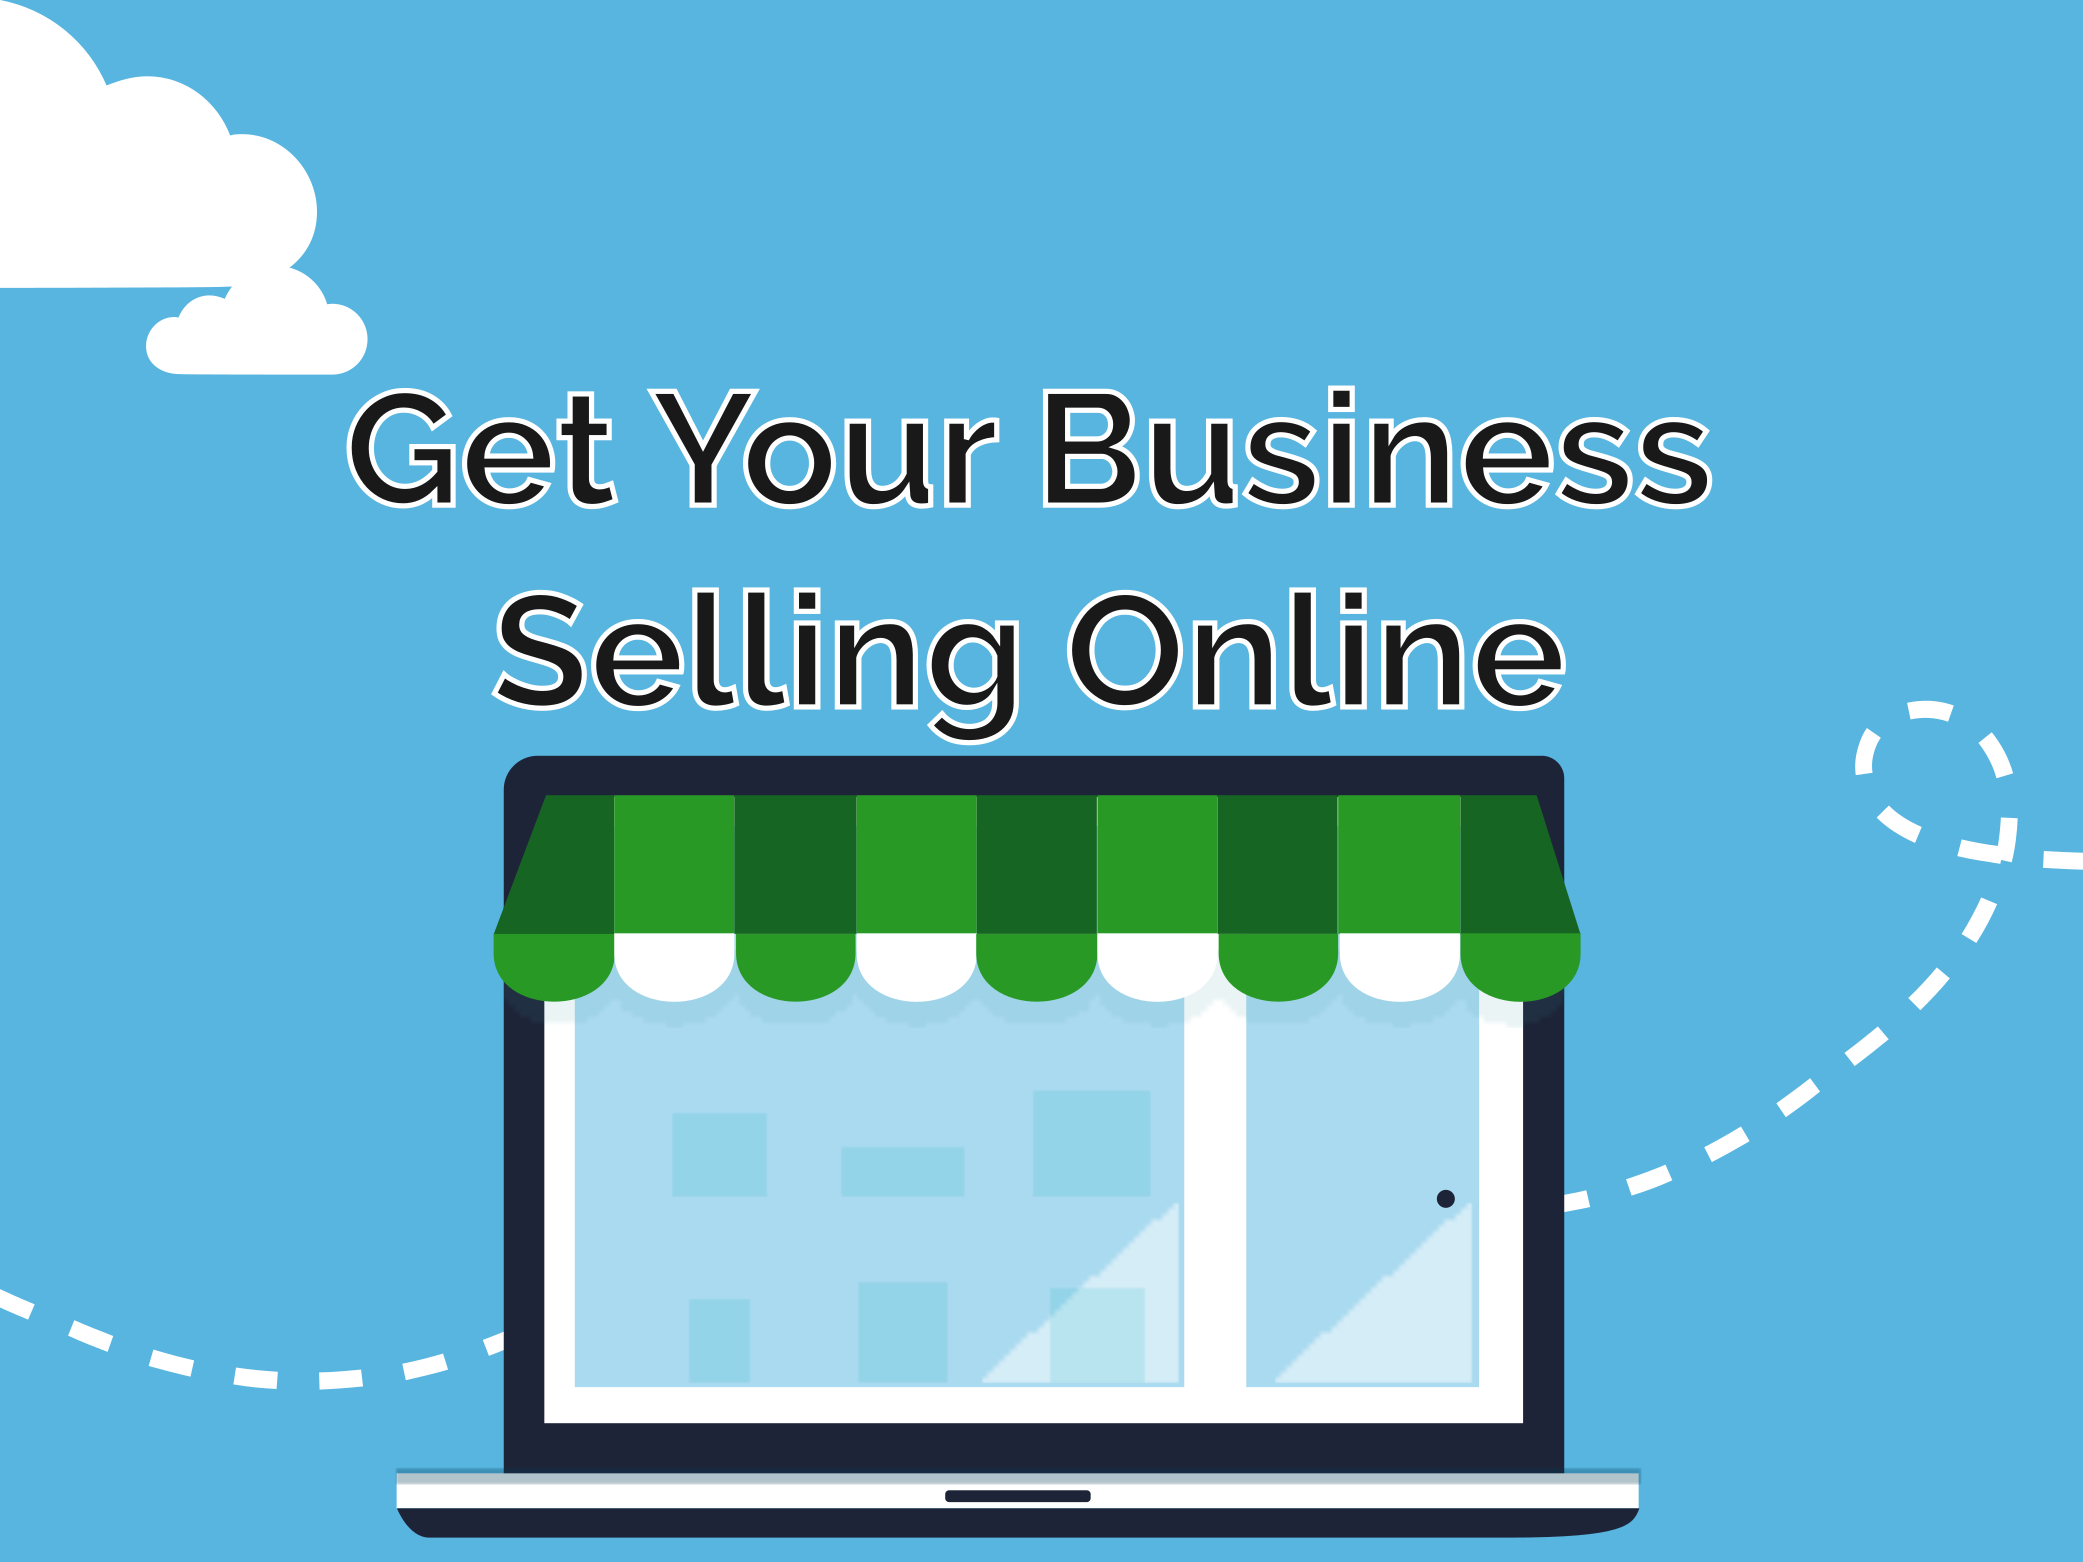 Get Your Business Selling Online